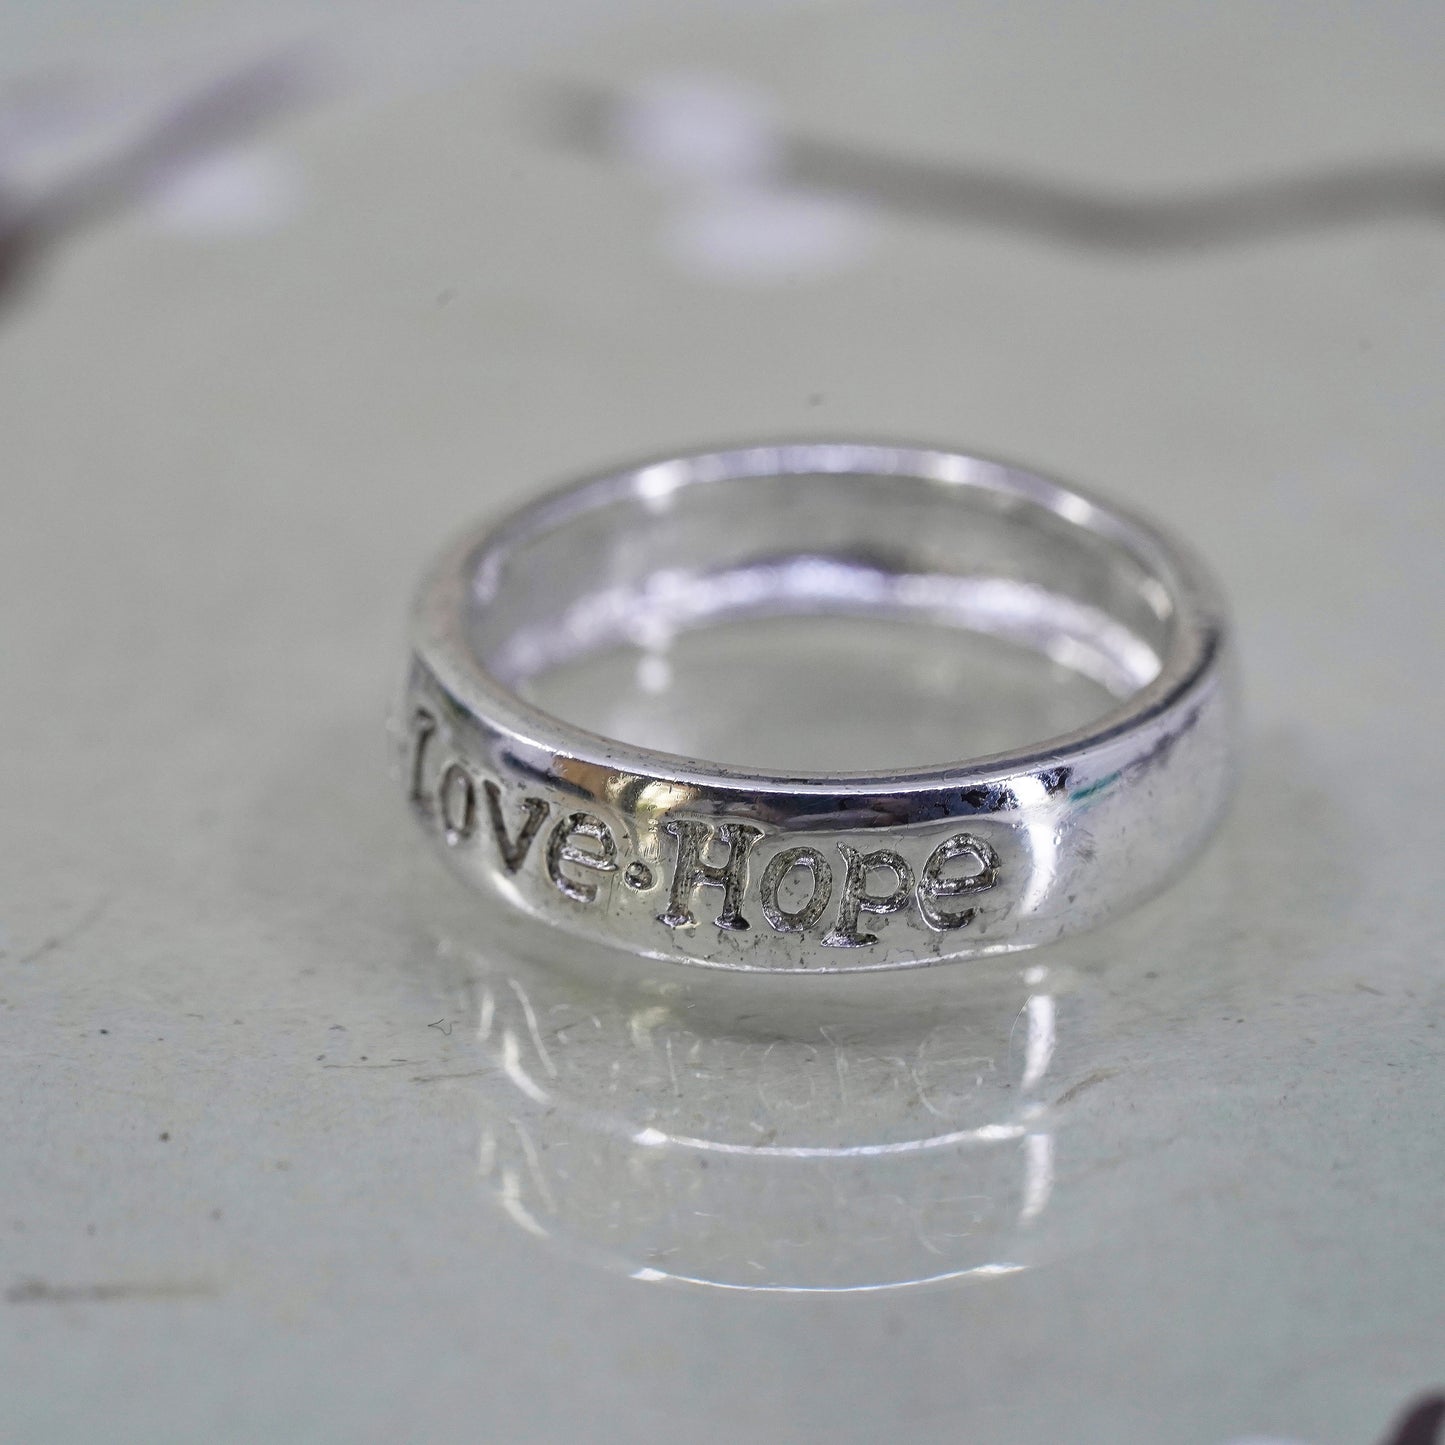 Size 6, Vintage sterling silver ring, 925 quote band engraved "faith love hope"